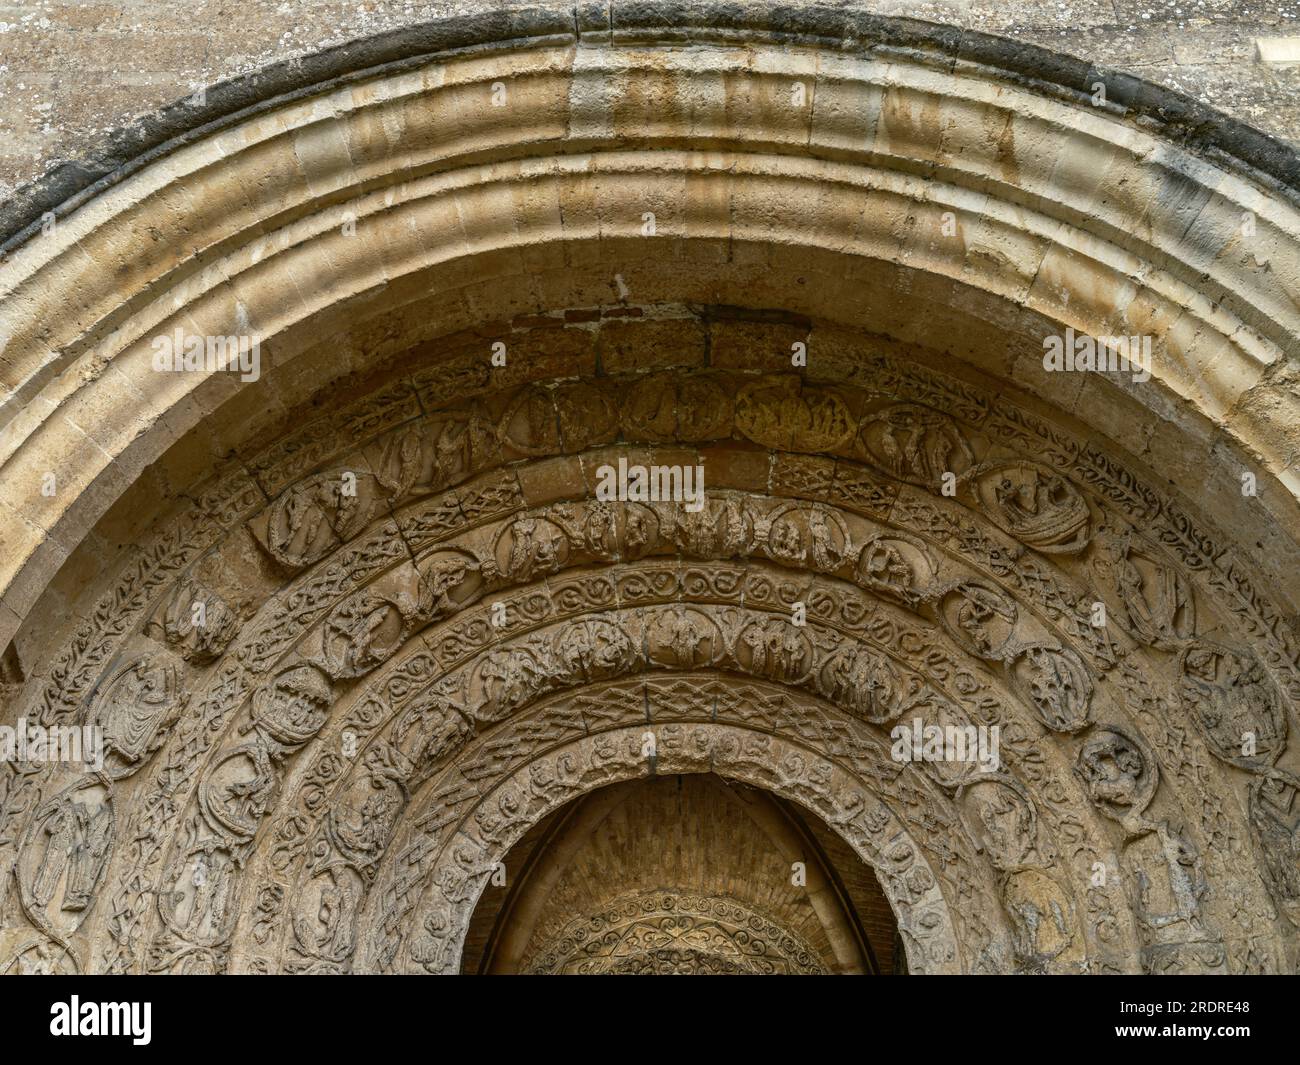 A high resolution image of Malmesbury Abbey Porch showing the weathered carvings that adorn the entrance to the ancient Benedictine Monastery. Stock Photo